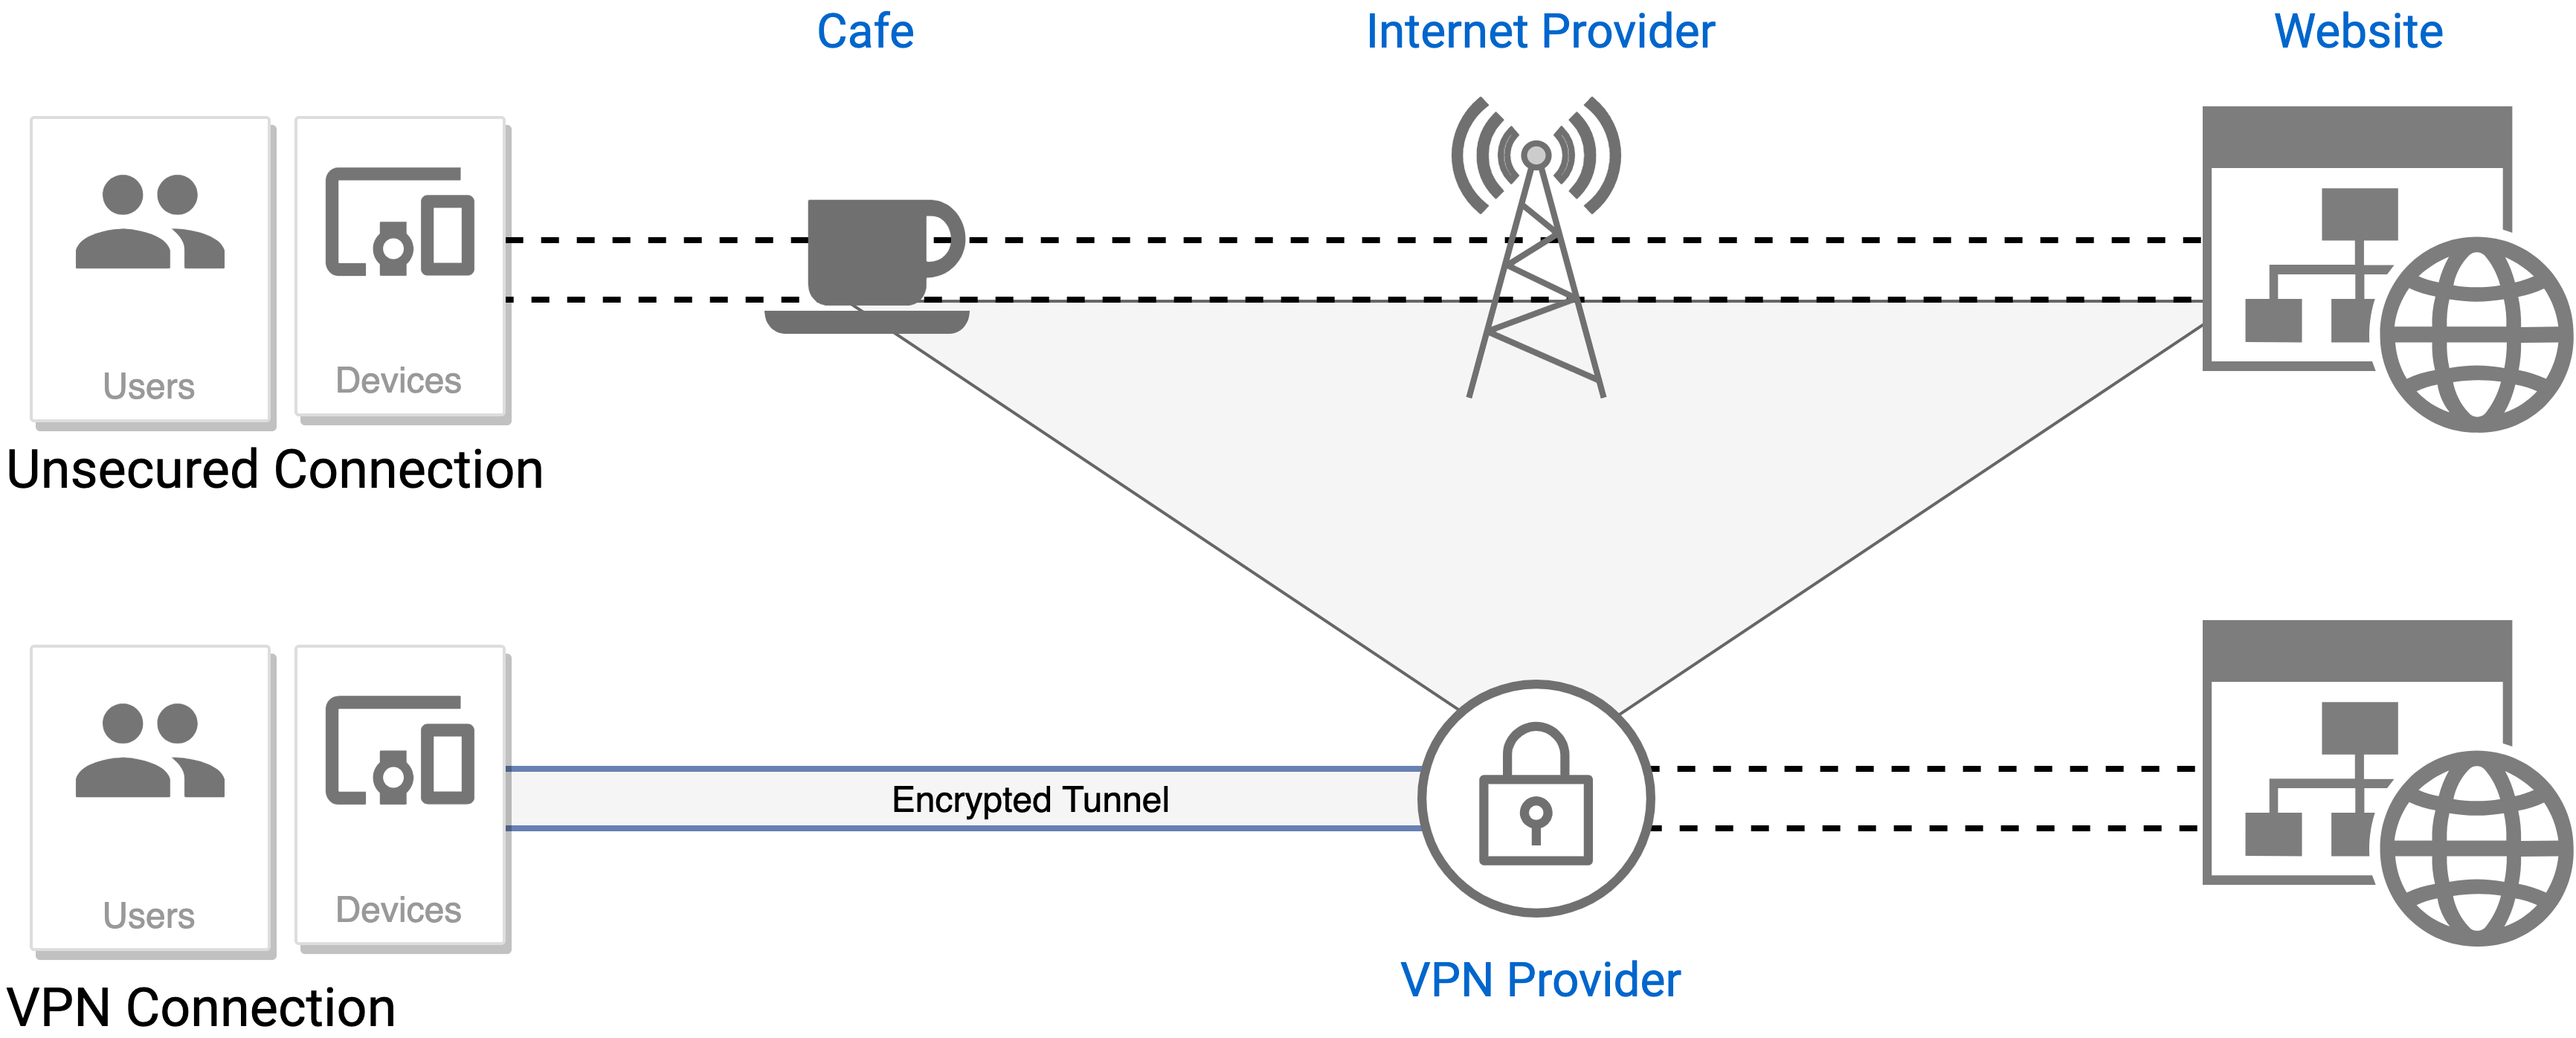 When should you use a VPN?